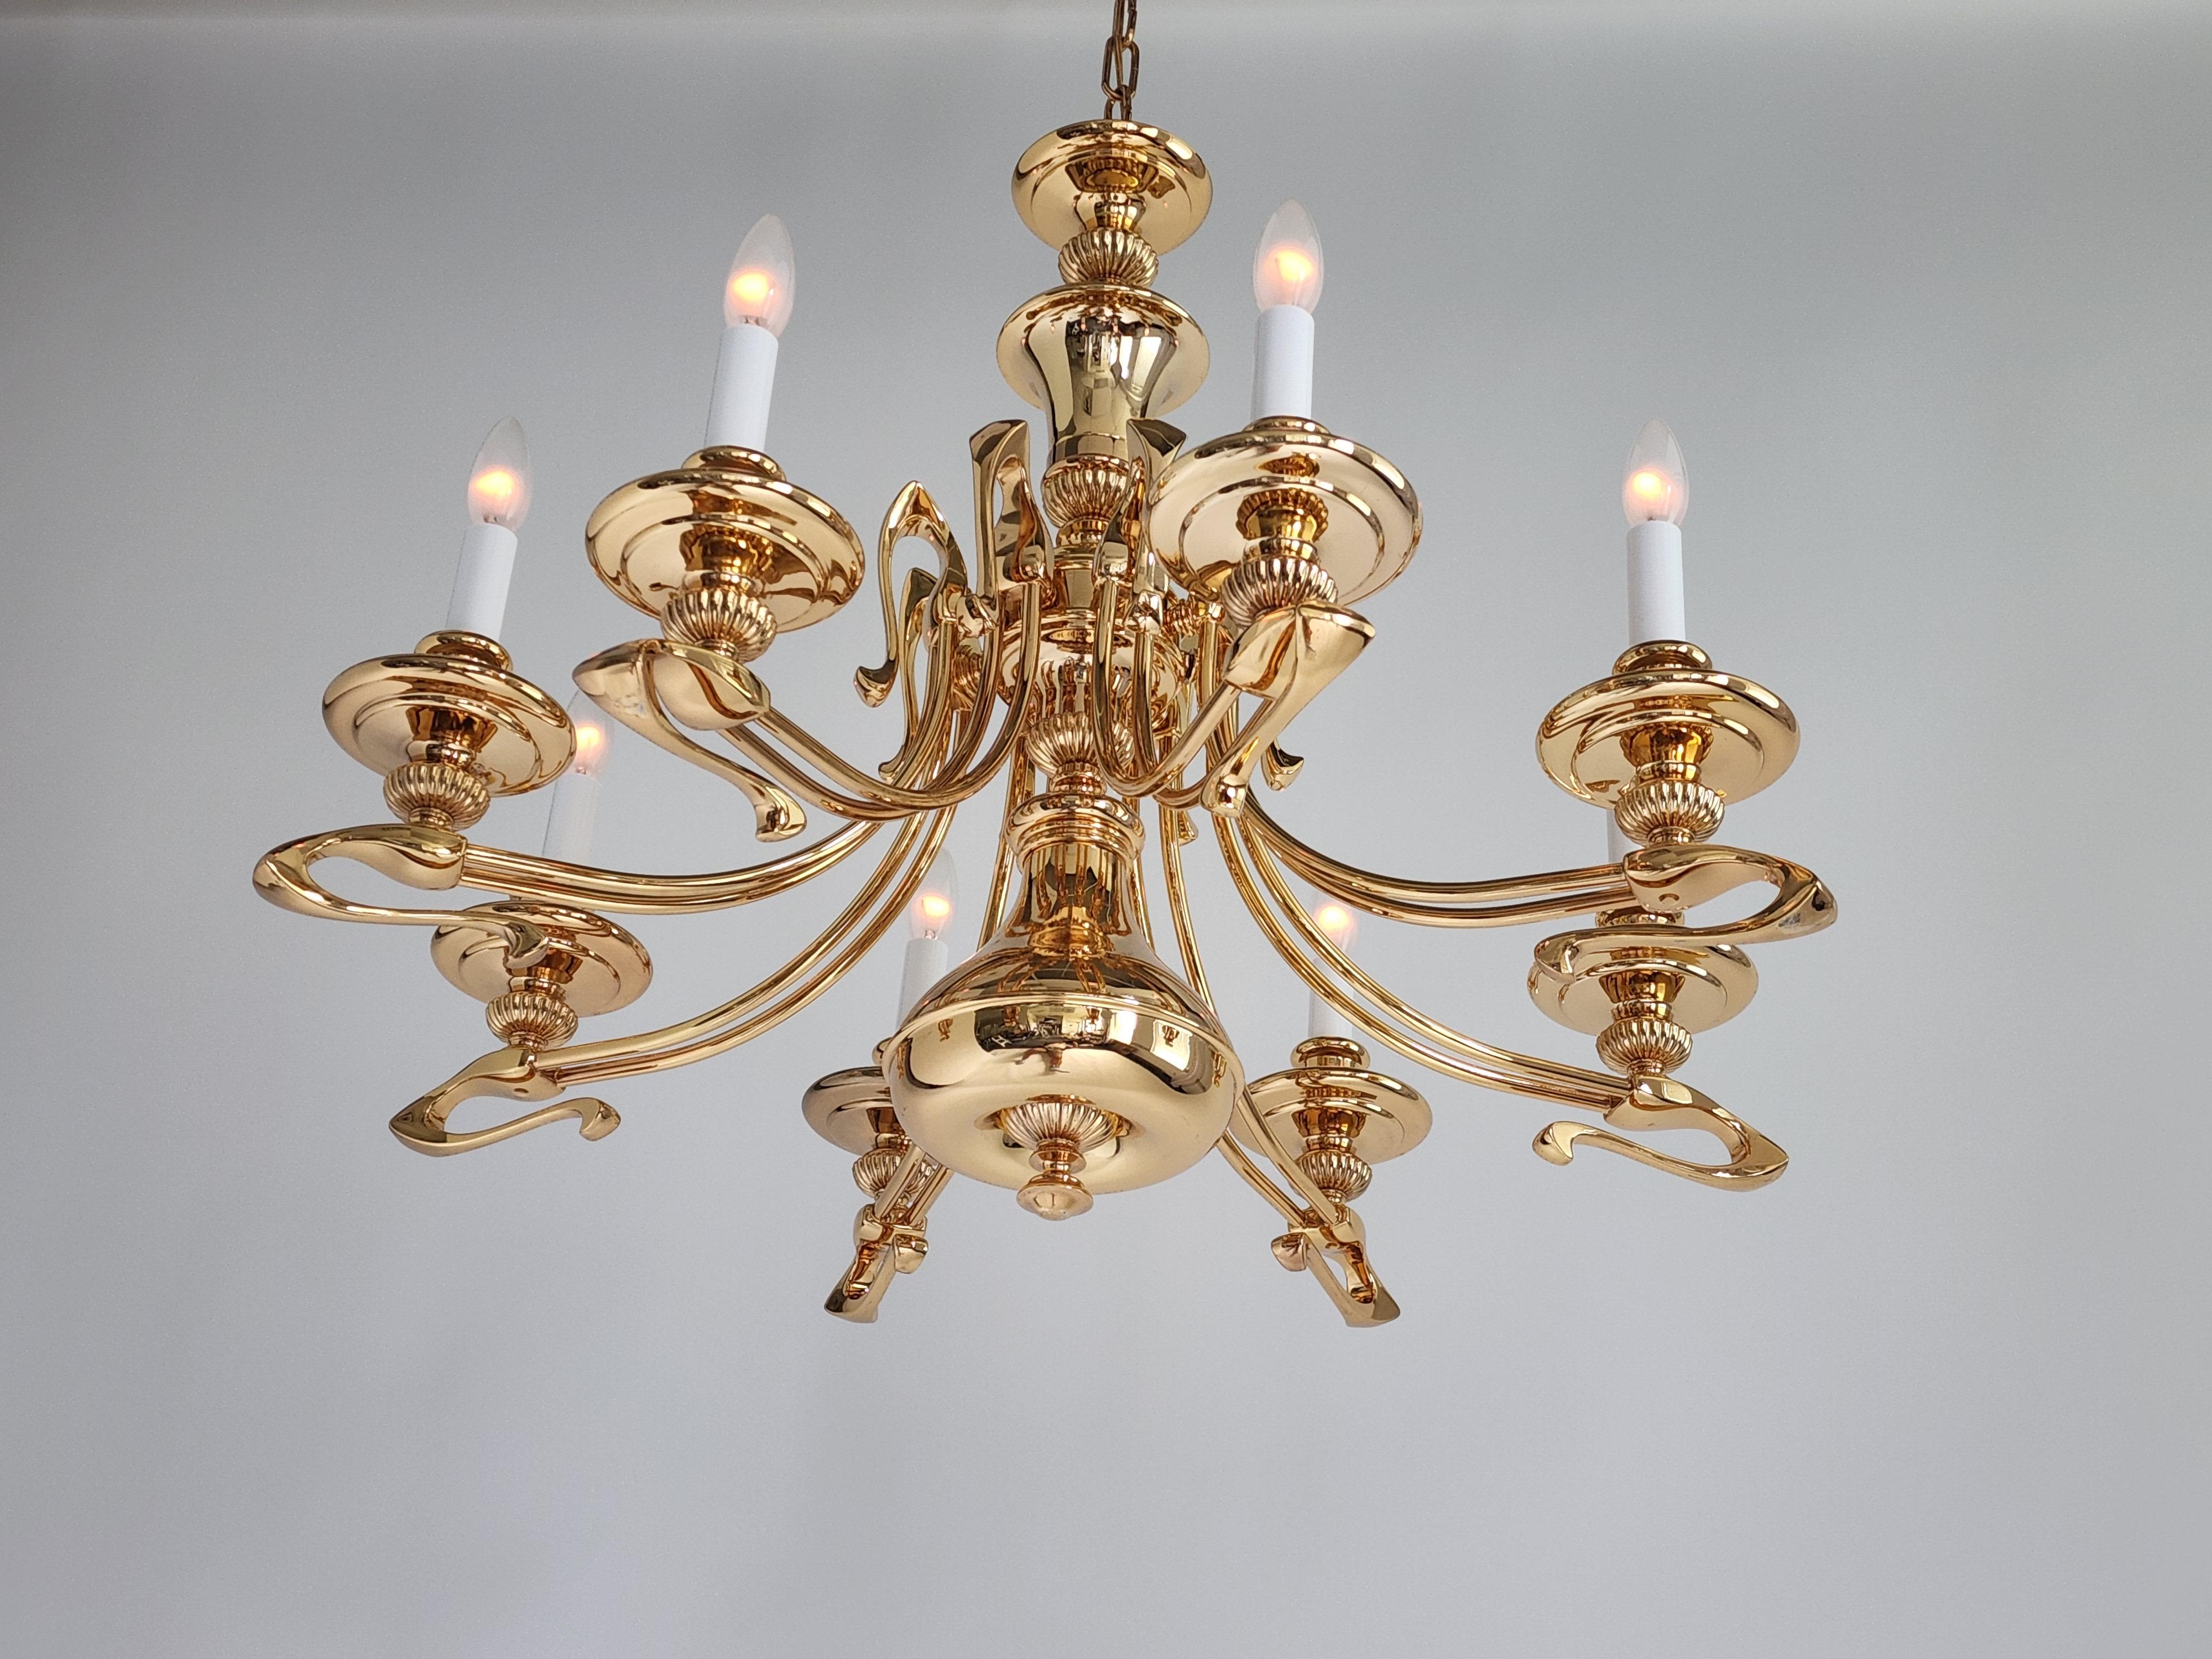 Italian 1980s Massive Art Nouveau Style Gold Plated Chandelier, Italy For Sale